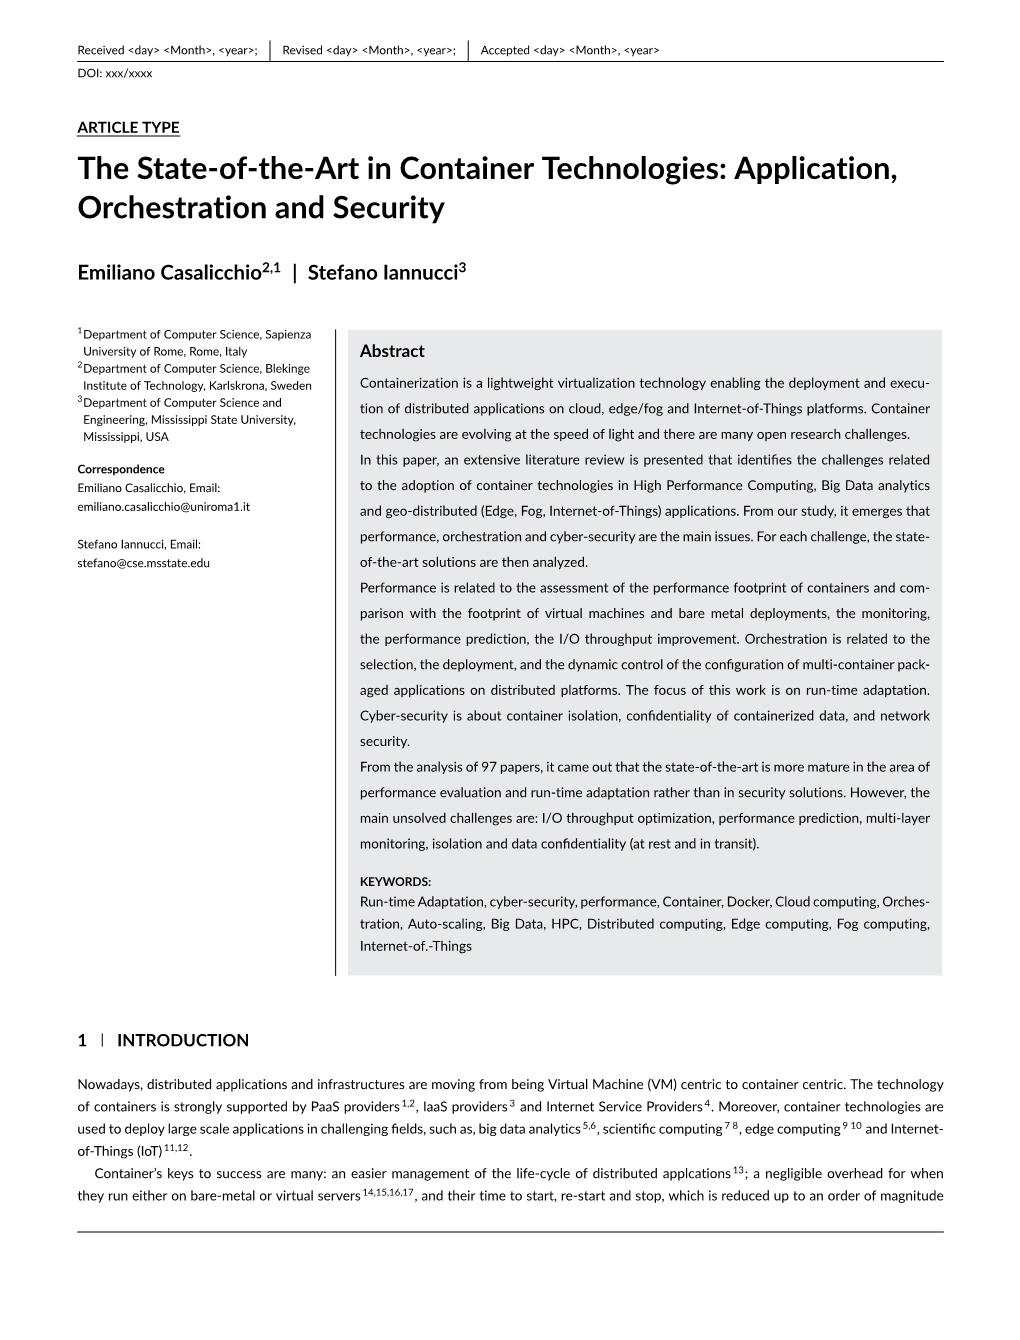 The State-Of-The-Art in Container Technologies: Application, Orchestration and Security